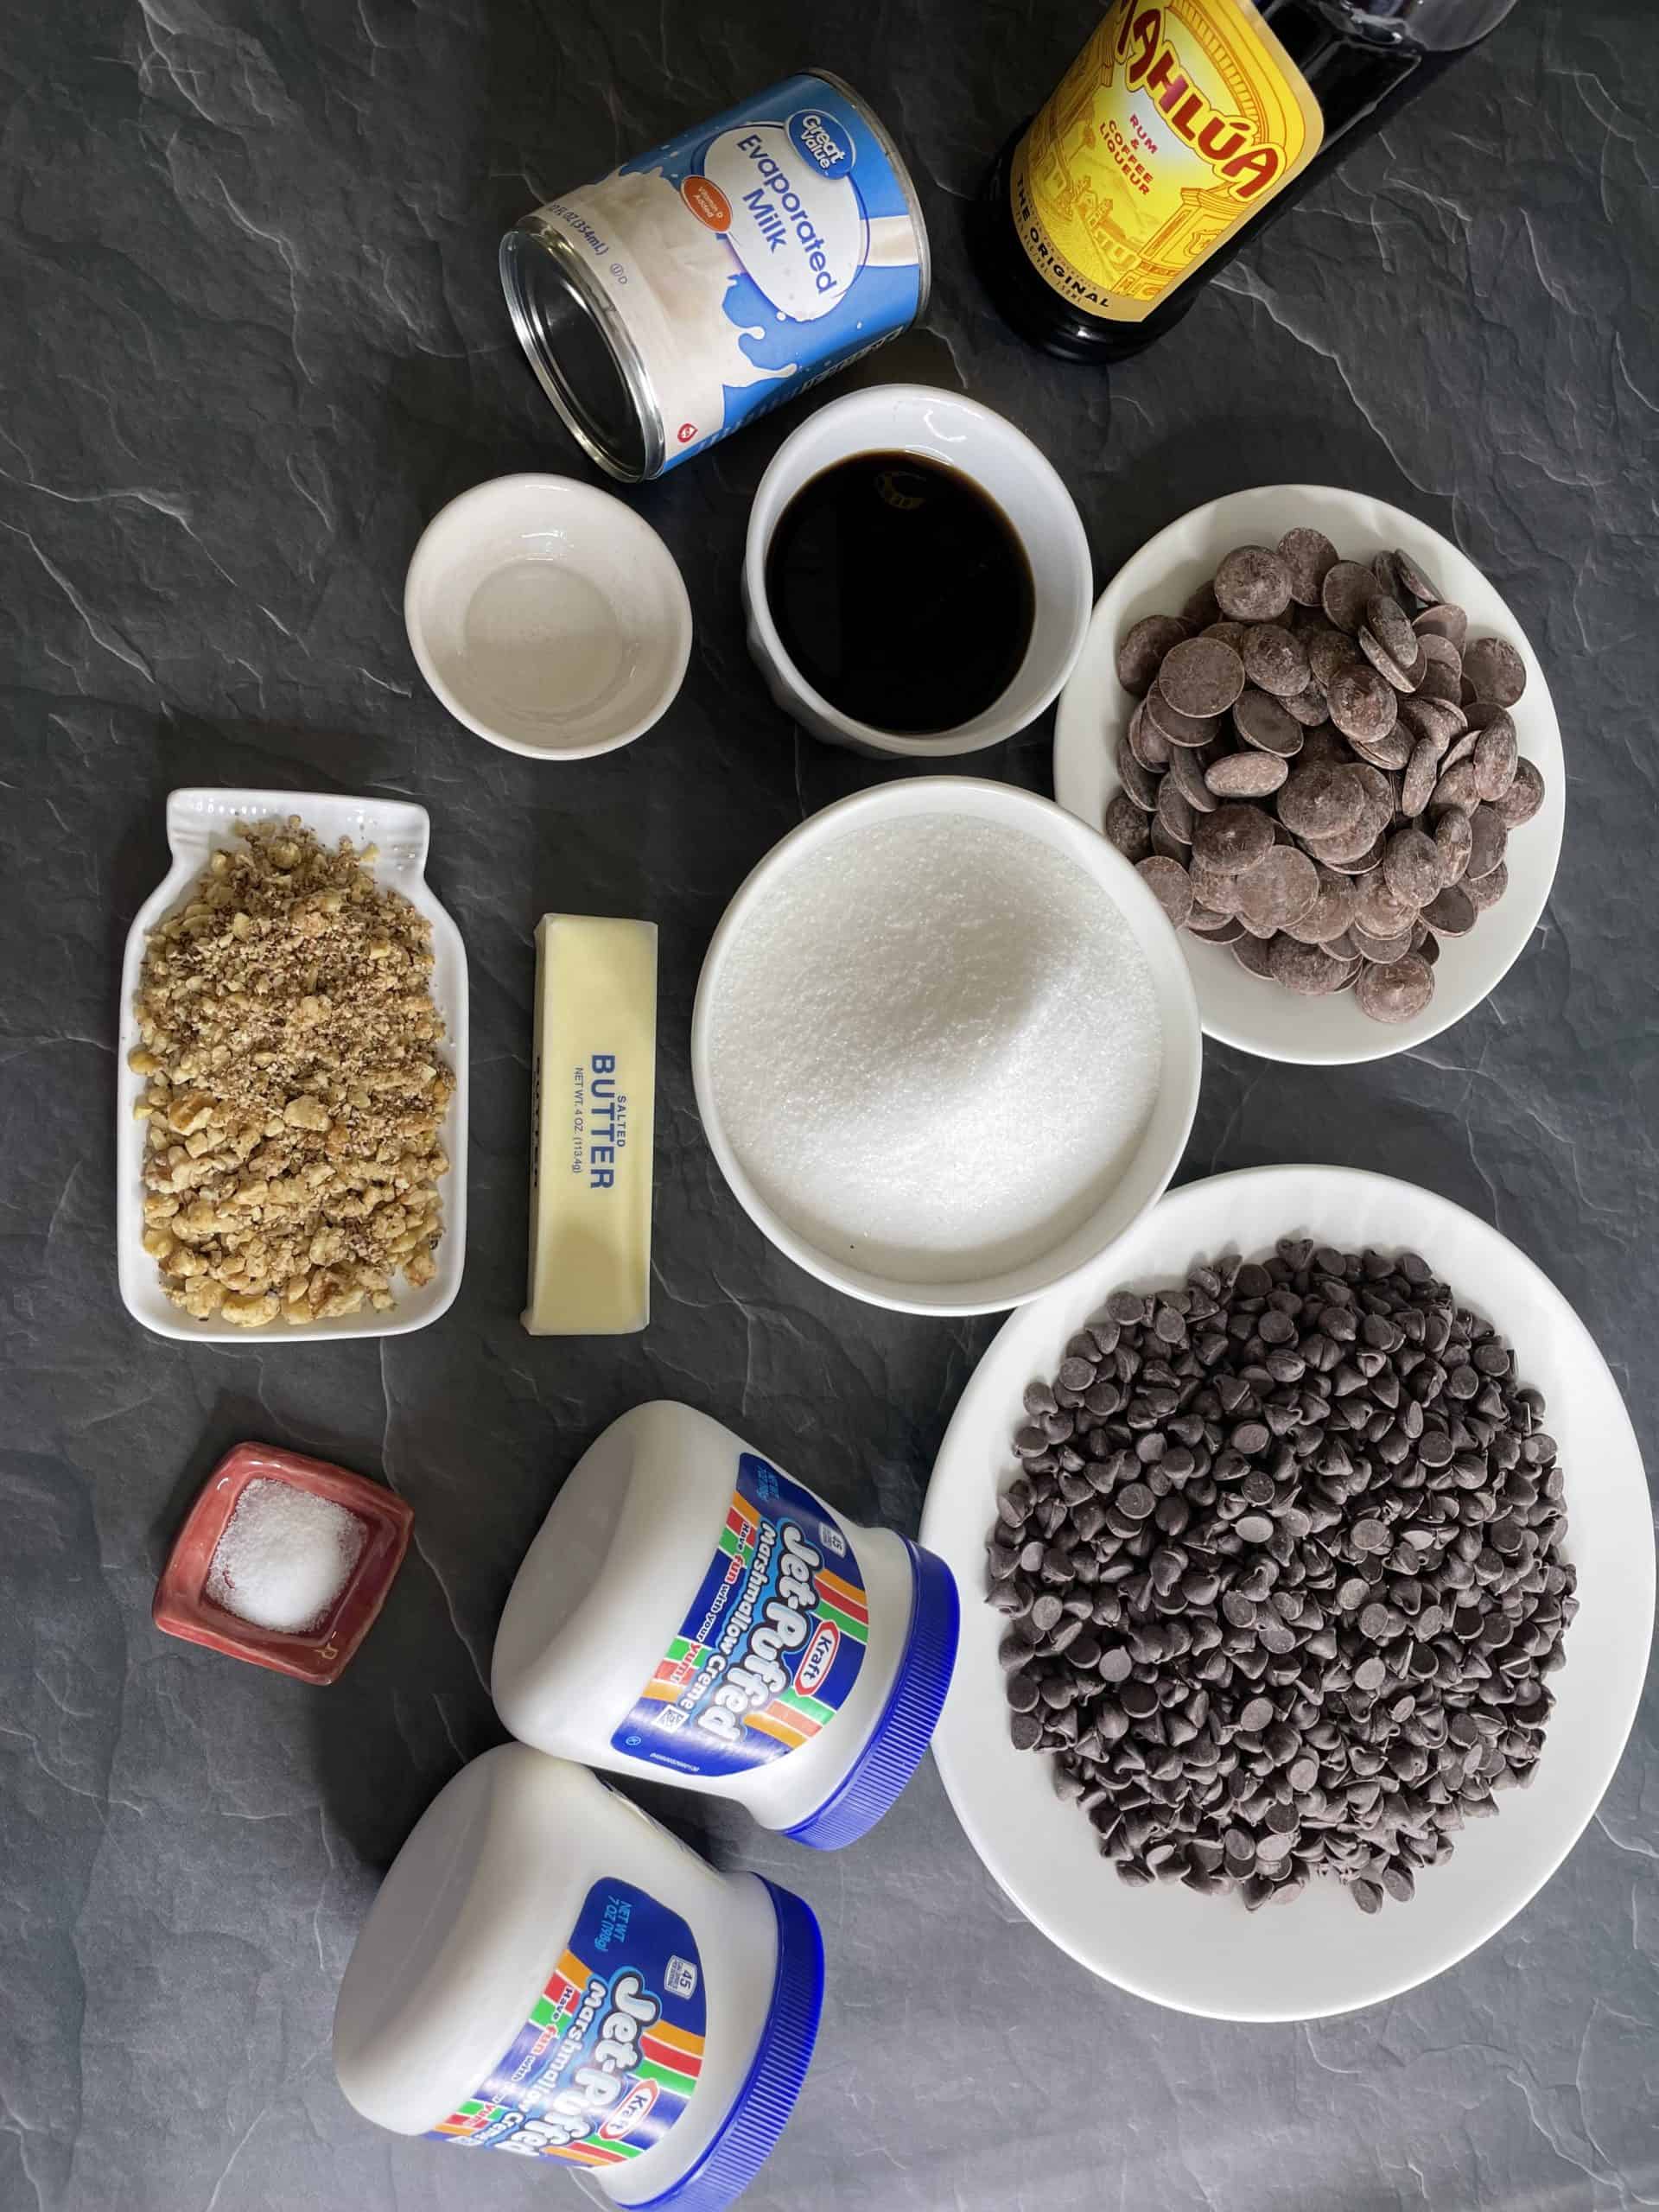 Chocolate Fudge Recipe Ingredients -Granulated Sugar, Marshmallow cream, Evaporated Milk, Salted Butter, Kahlua, Salt, Semi-Sweet Chocolate Chips, Milk Chocolate Chips, Chopped Walnuts, and Vanilla Extract. 